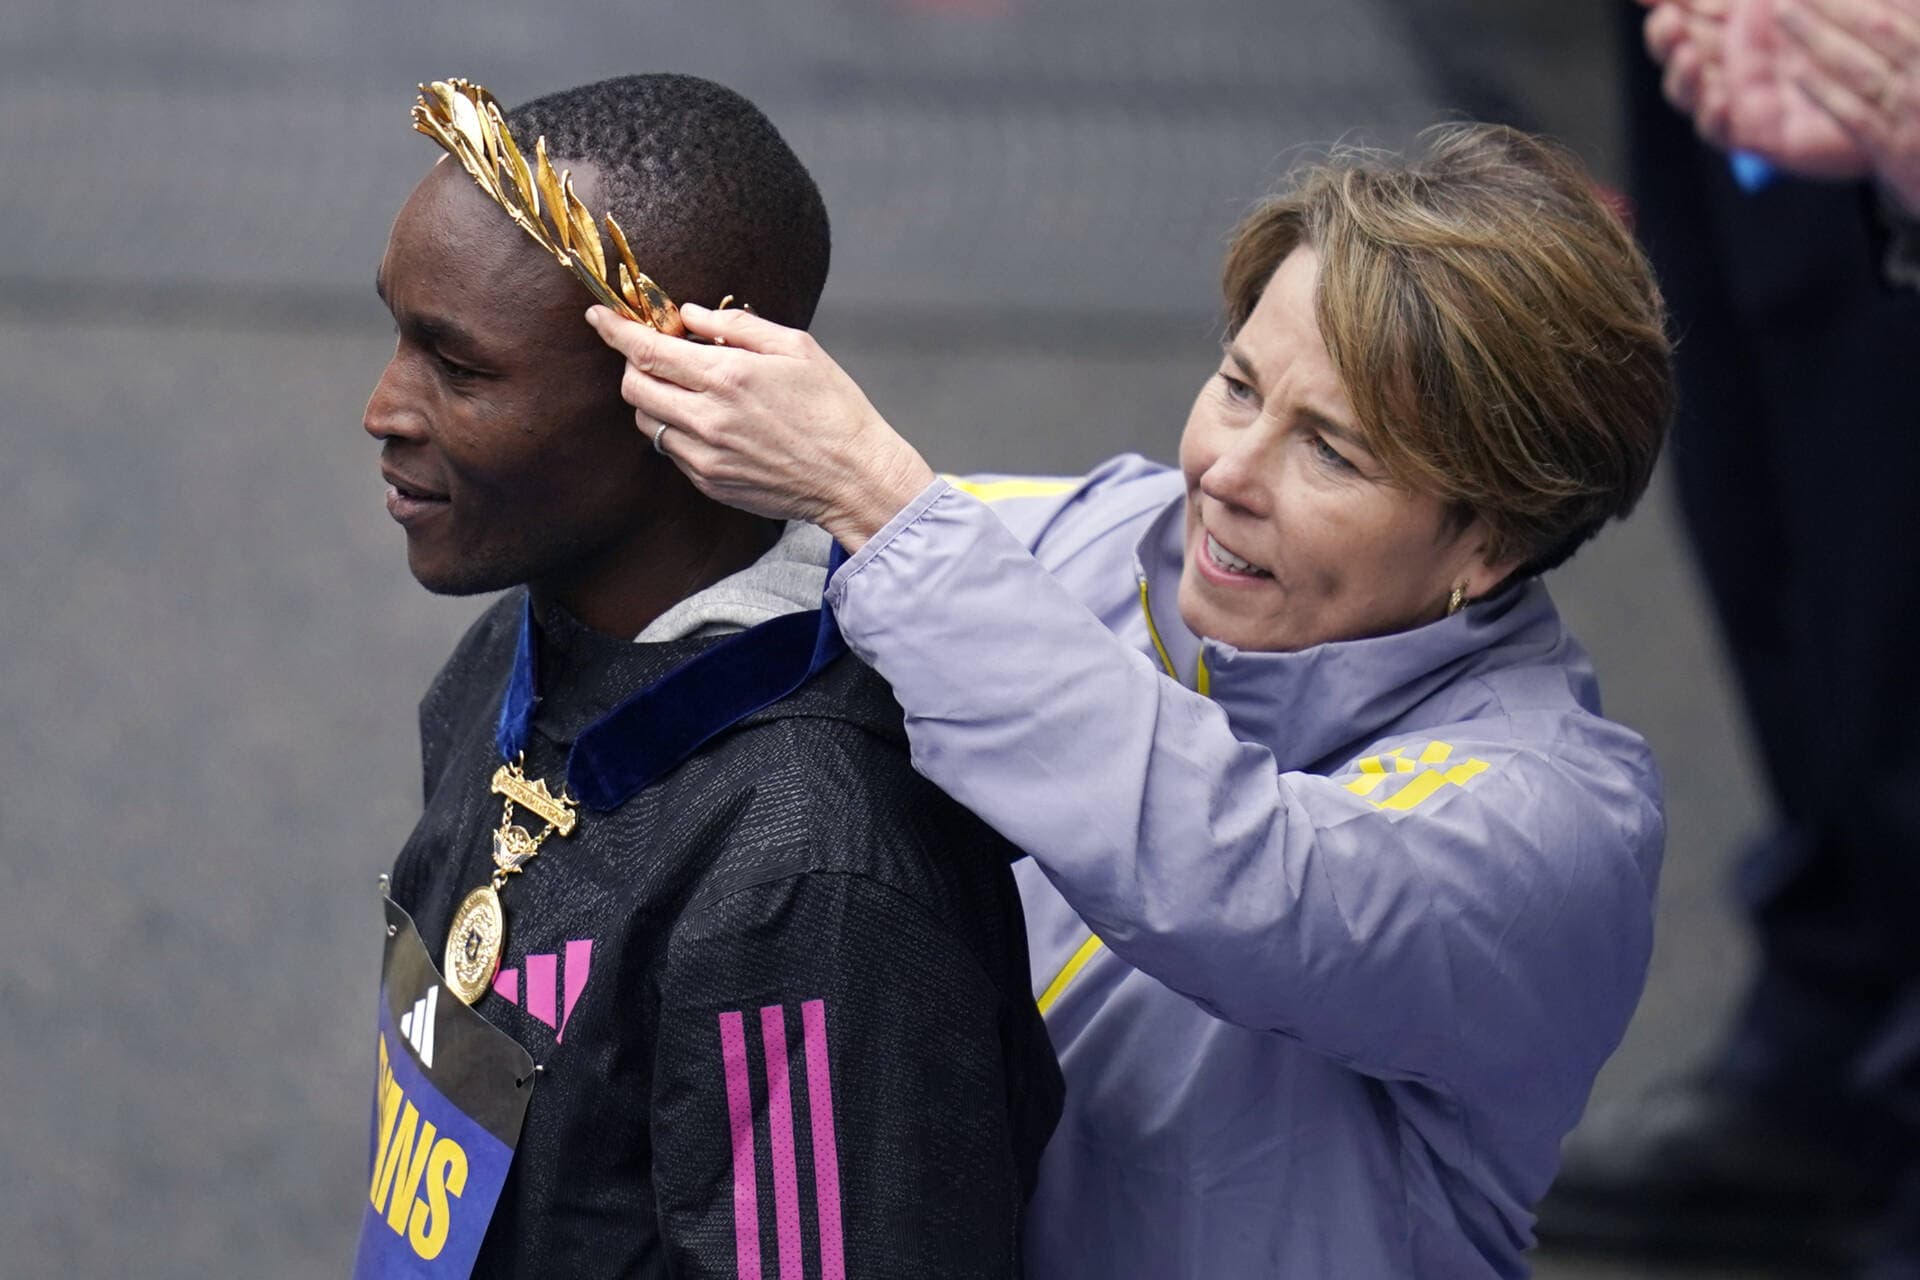 Evans Chebet, of Kenya, stands during the awards ceremony after winning men's division of the Boston Marathon, Monday, April 17, 2023, in Boston. At right is Mass. Gov. Maura Healey. (Charles Krupa/AP)